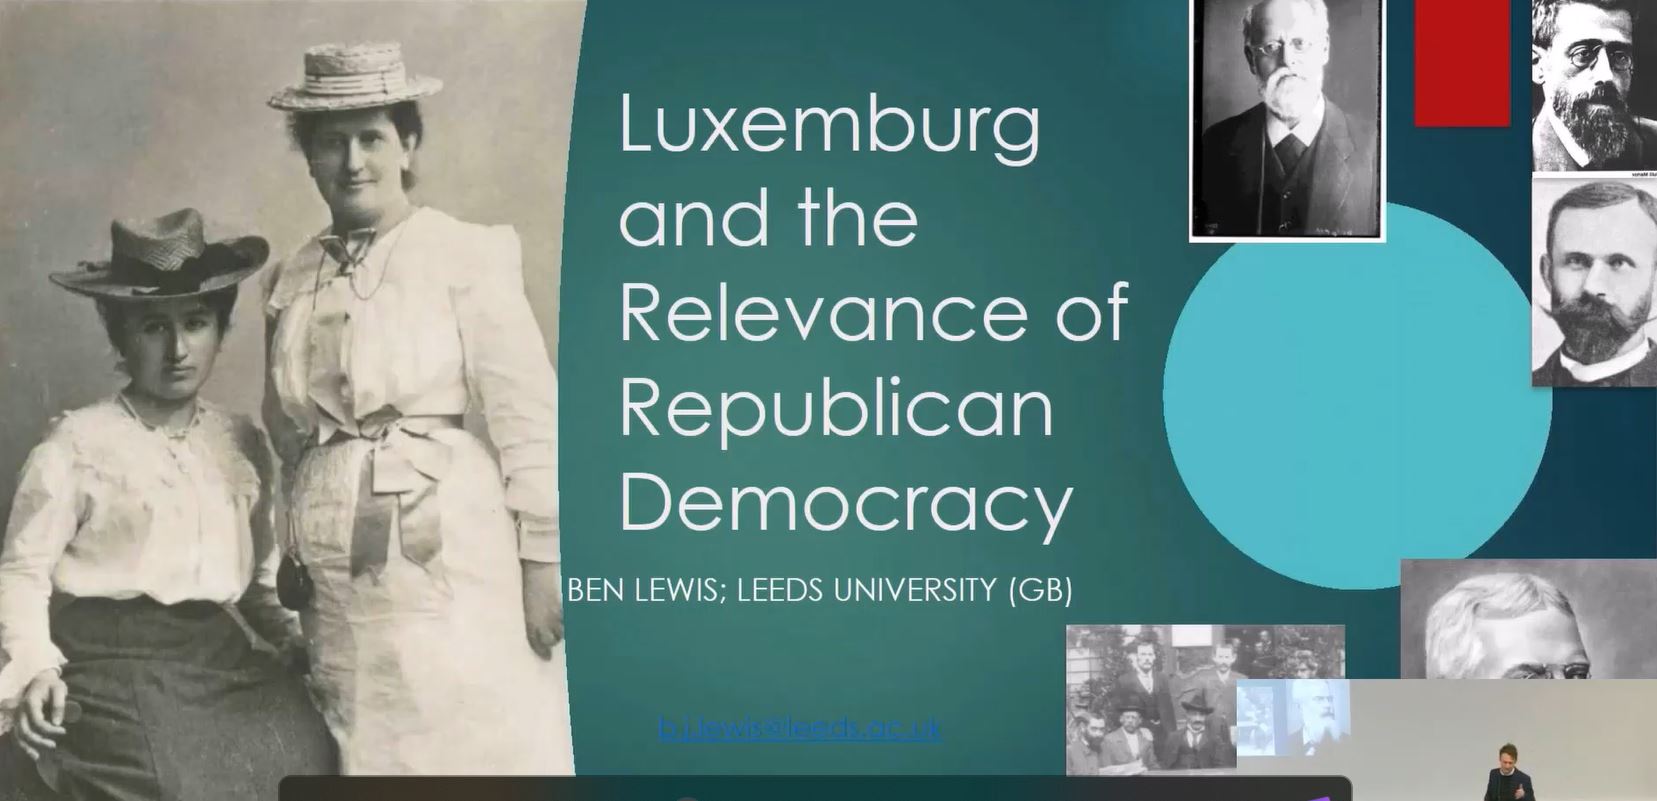 Rosa Luxemburg and the Relevance of Republican Democracy